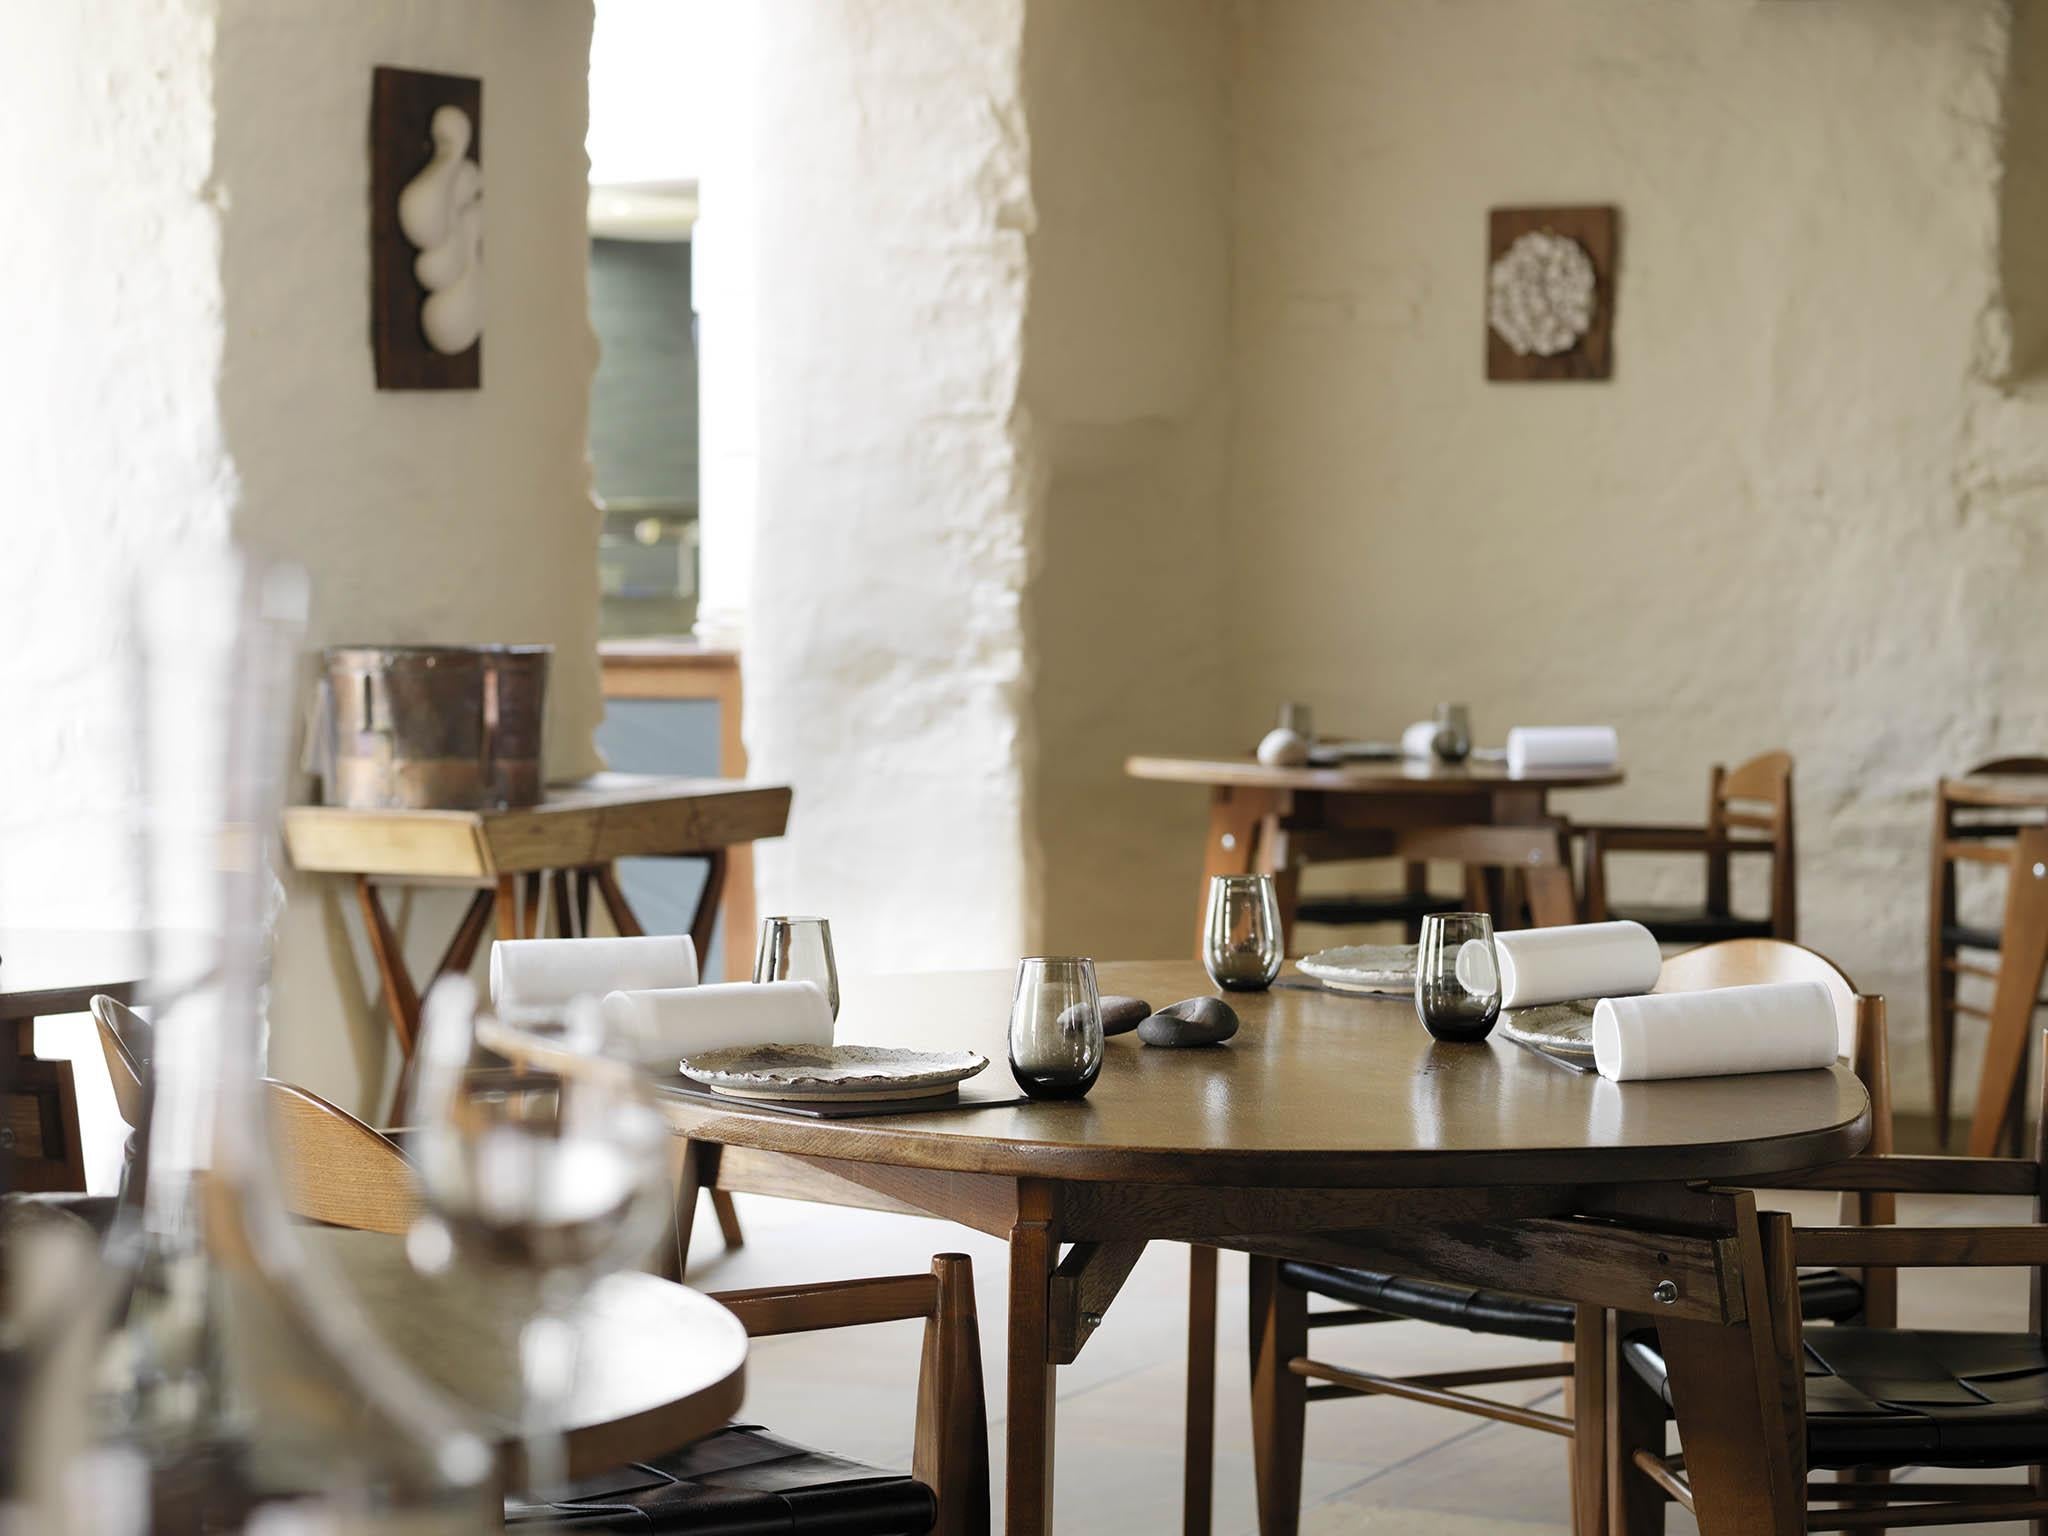 L’Enclume mixes a historic building with Scandi-inspired furniture and modern British food